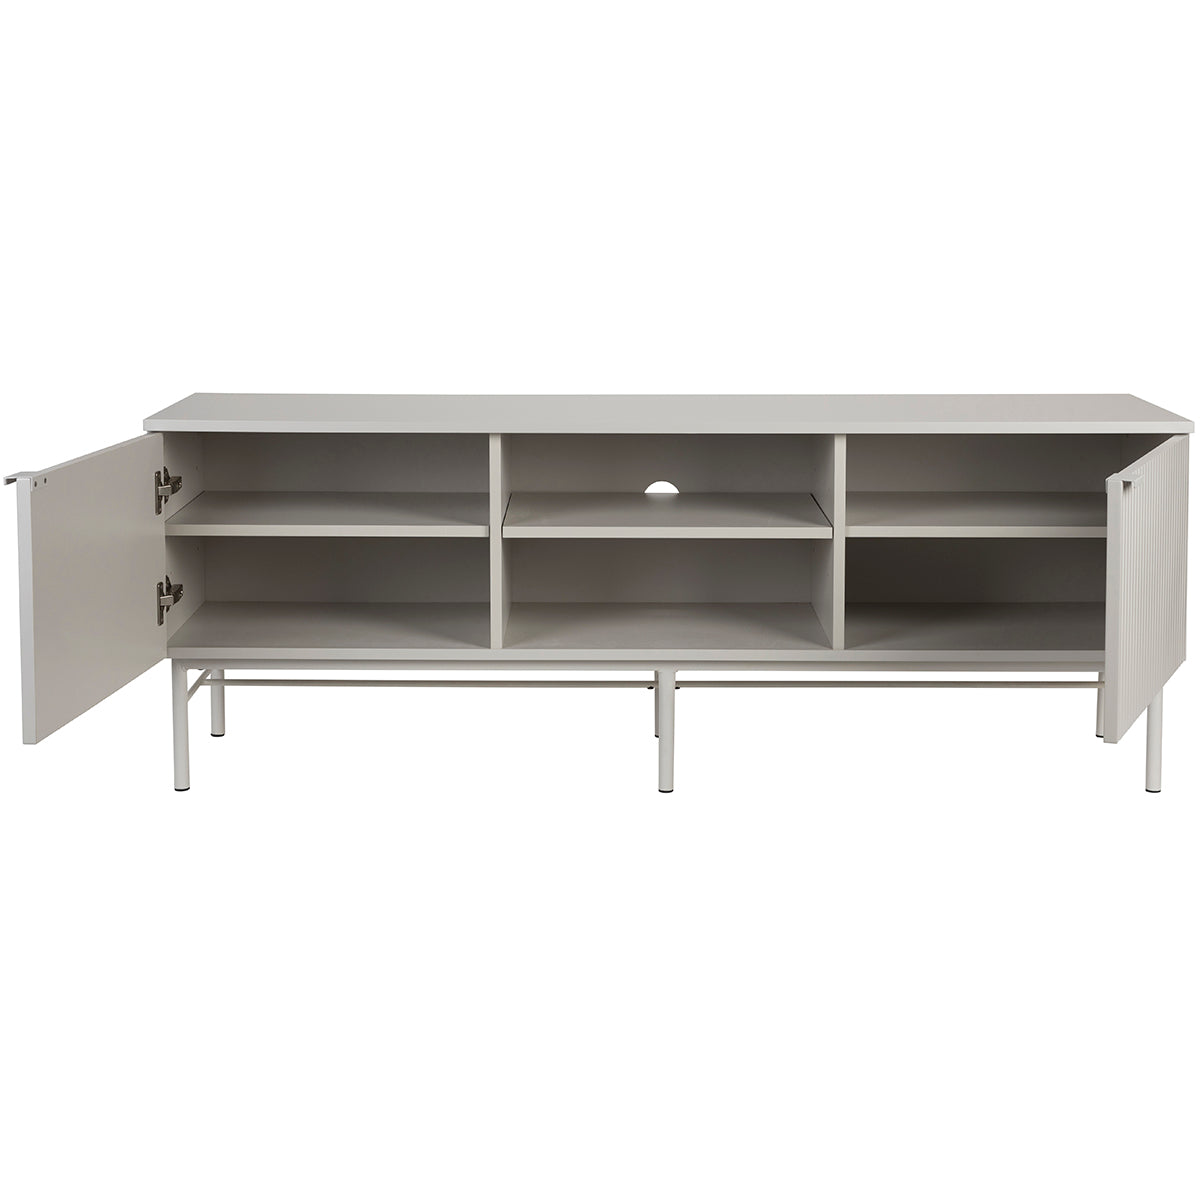 Cayo White Low Sideboard